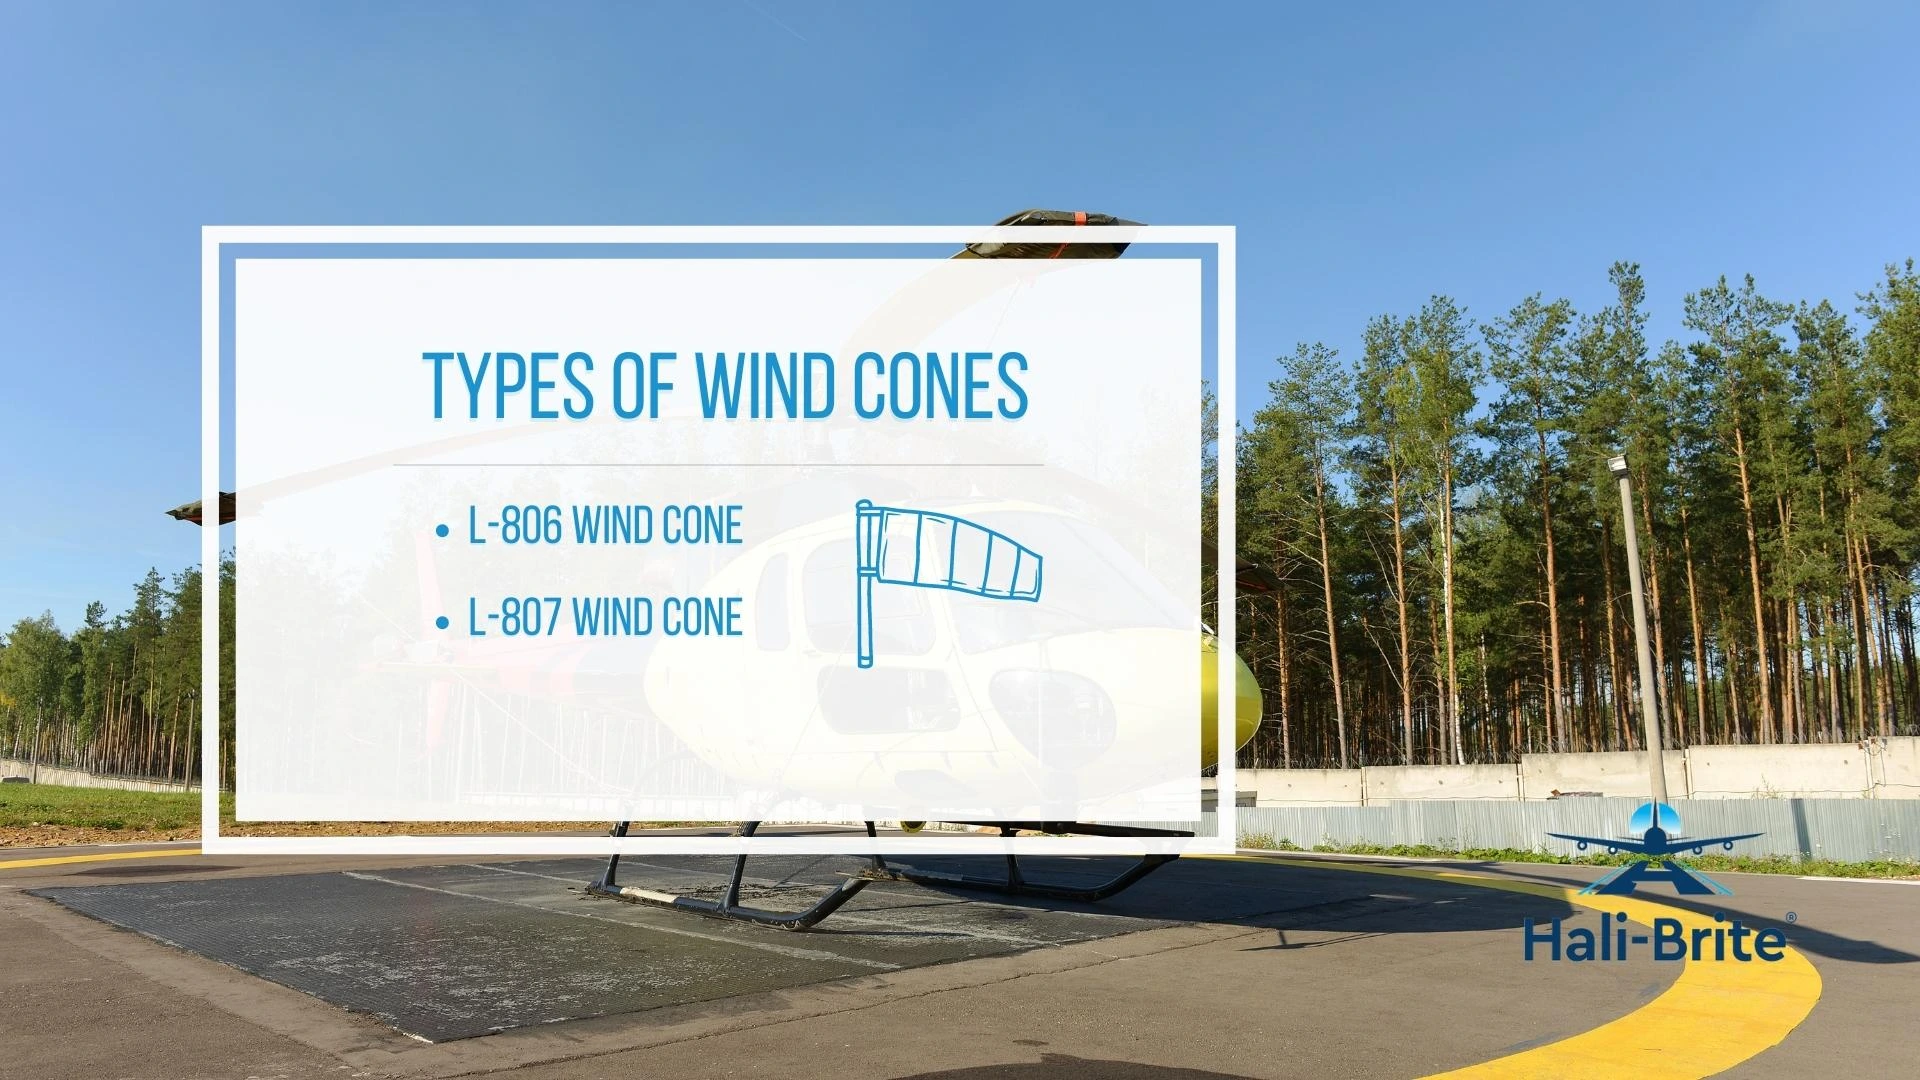 Infographic of types of wind cone